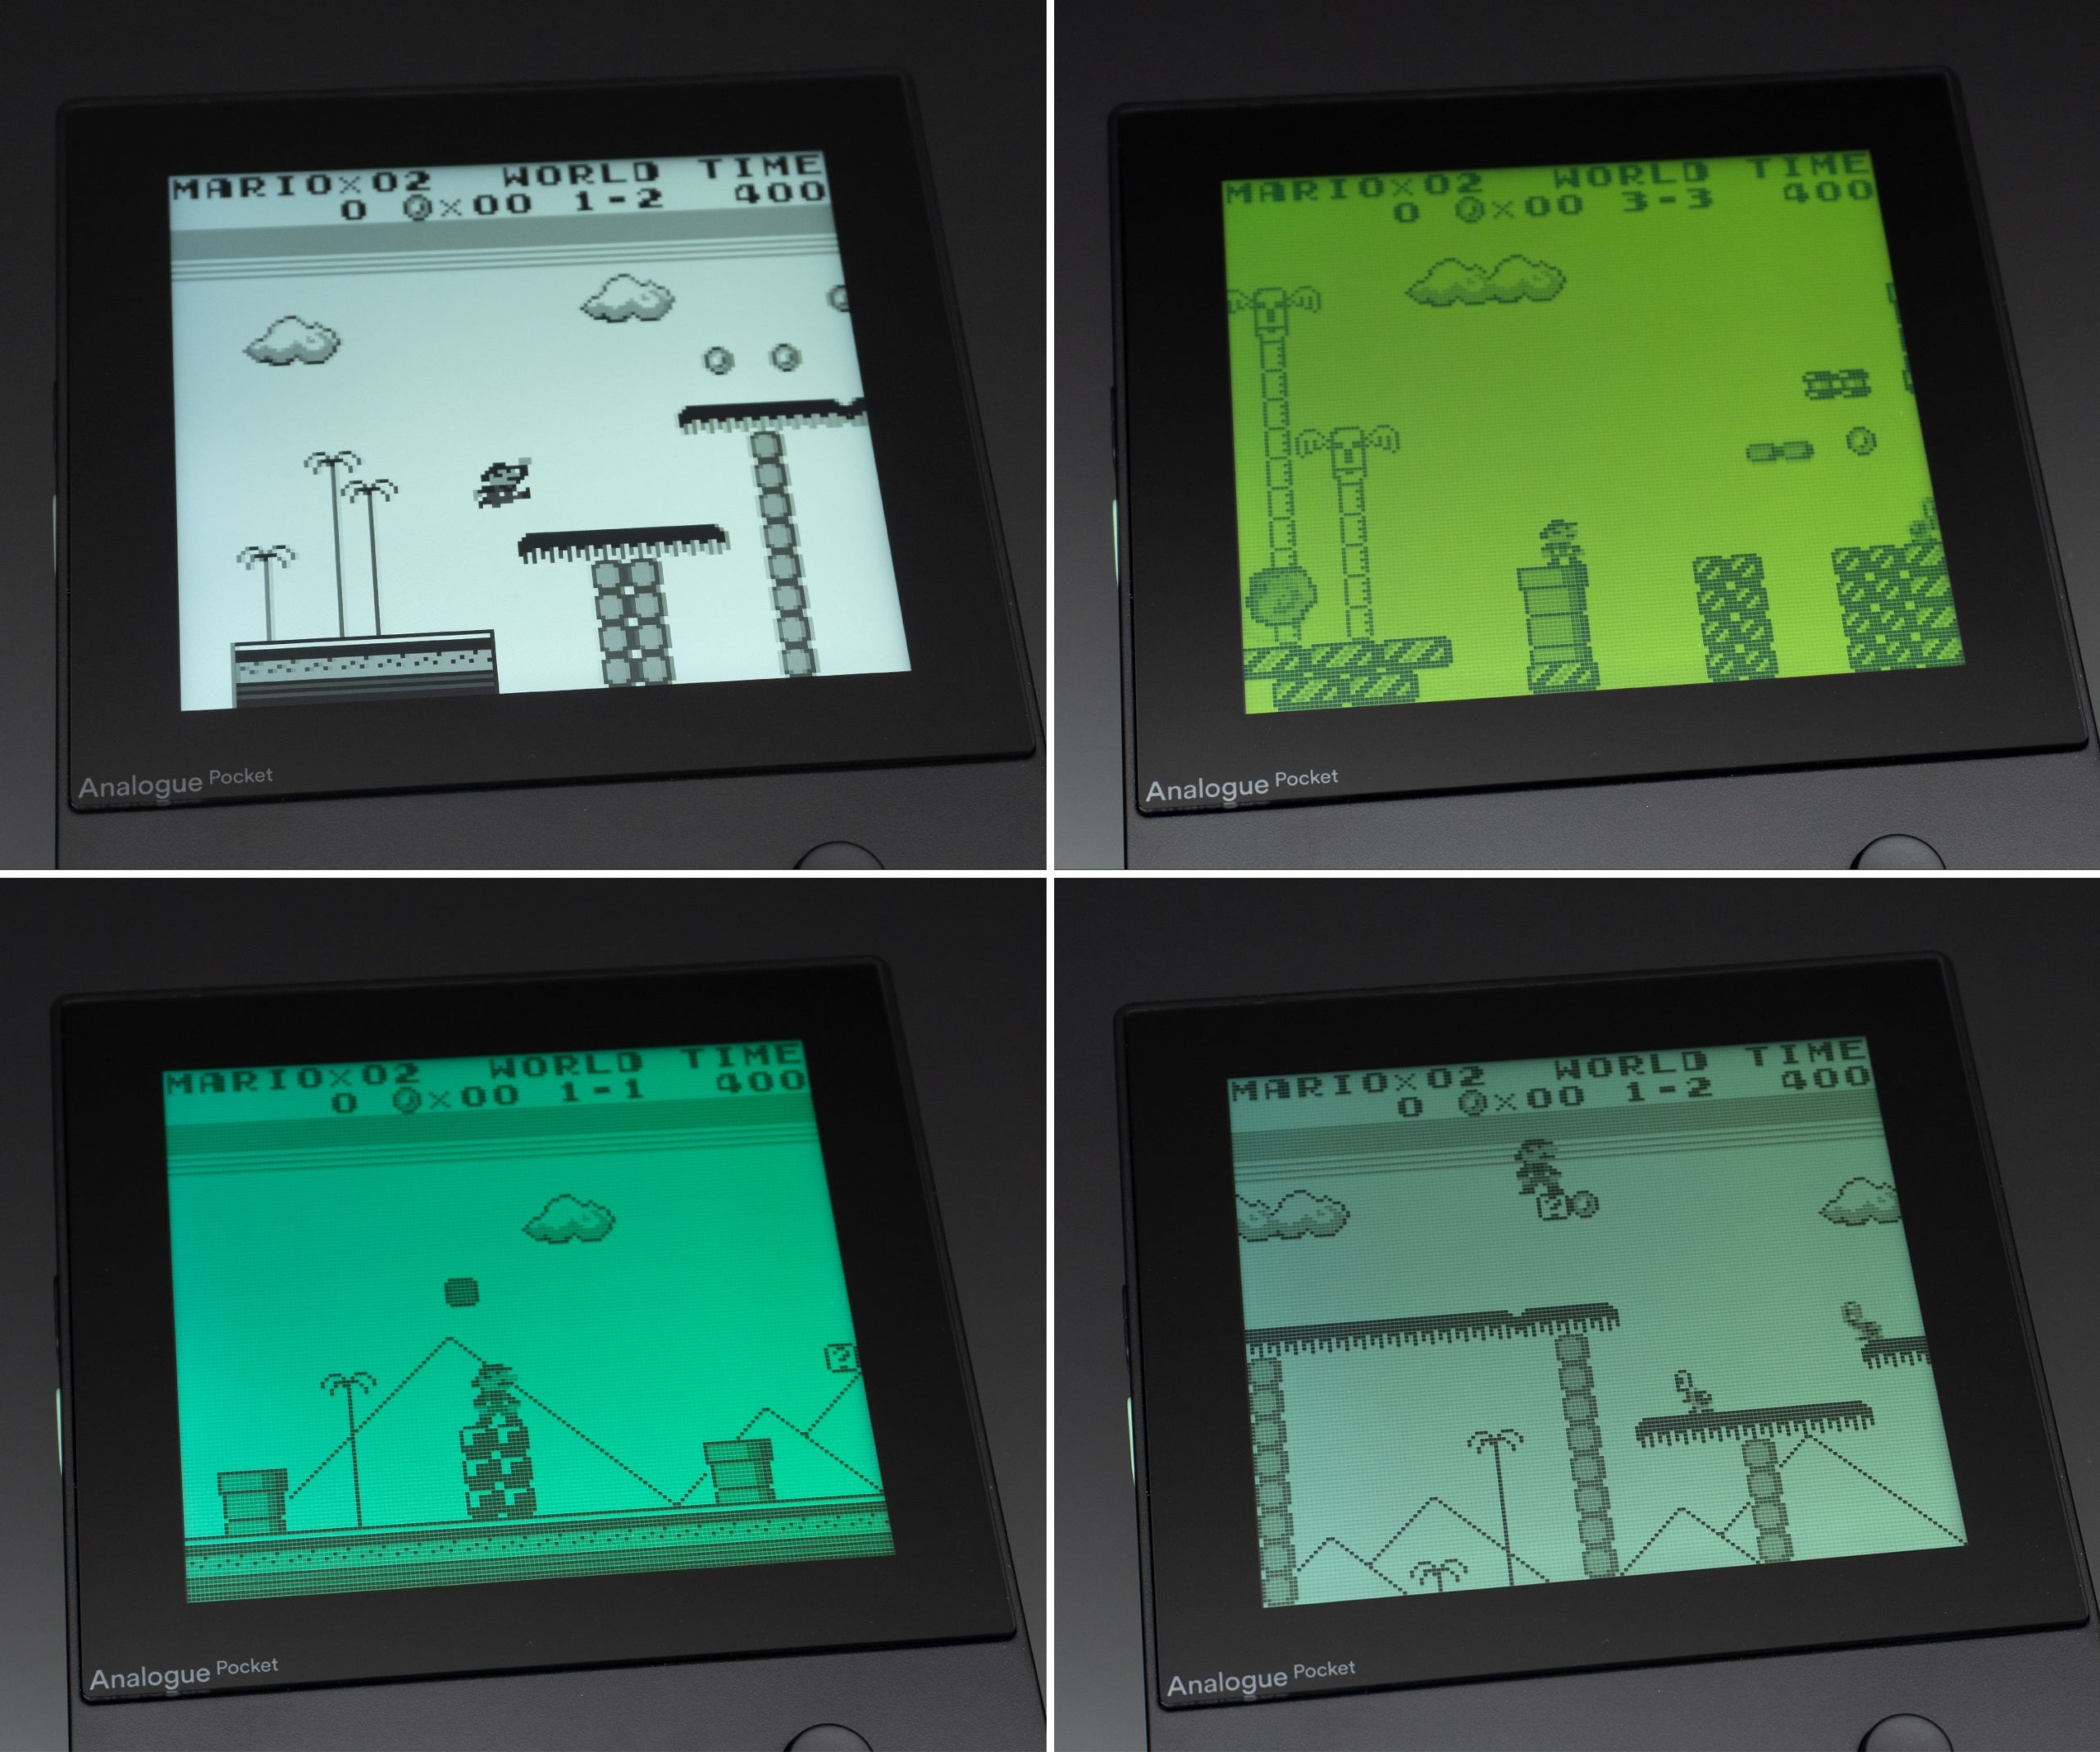 Hard-coded alternate display modes (not filters) recreate the appearance of classic handheld displays, right down to the barely visible pixel grids in the background. Here you can see the standard Analogue display mode for Game Boy games (upper left), the original Game Boy display mode (upper right), the Game Boy Light display mode (lower left), and the Game Boy Pocket display mode (lower right). (Photo: Andrew Liszewski/Gizmodo)